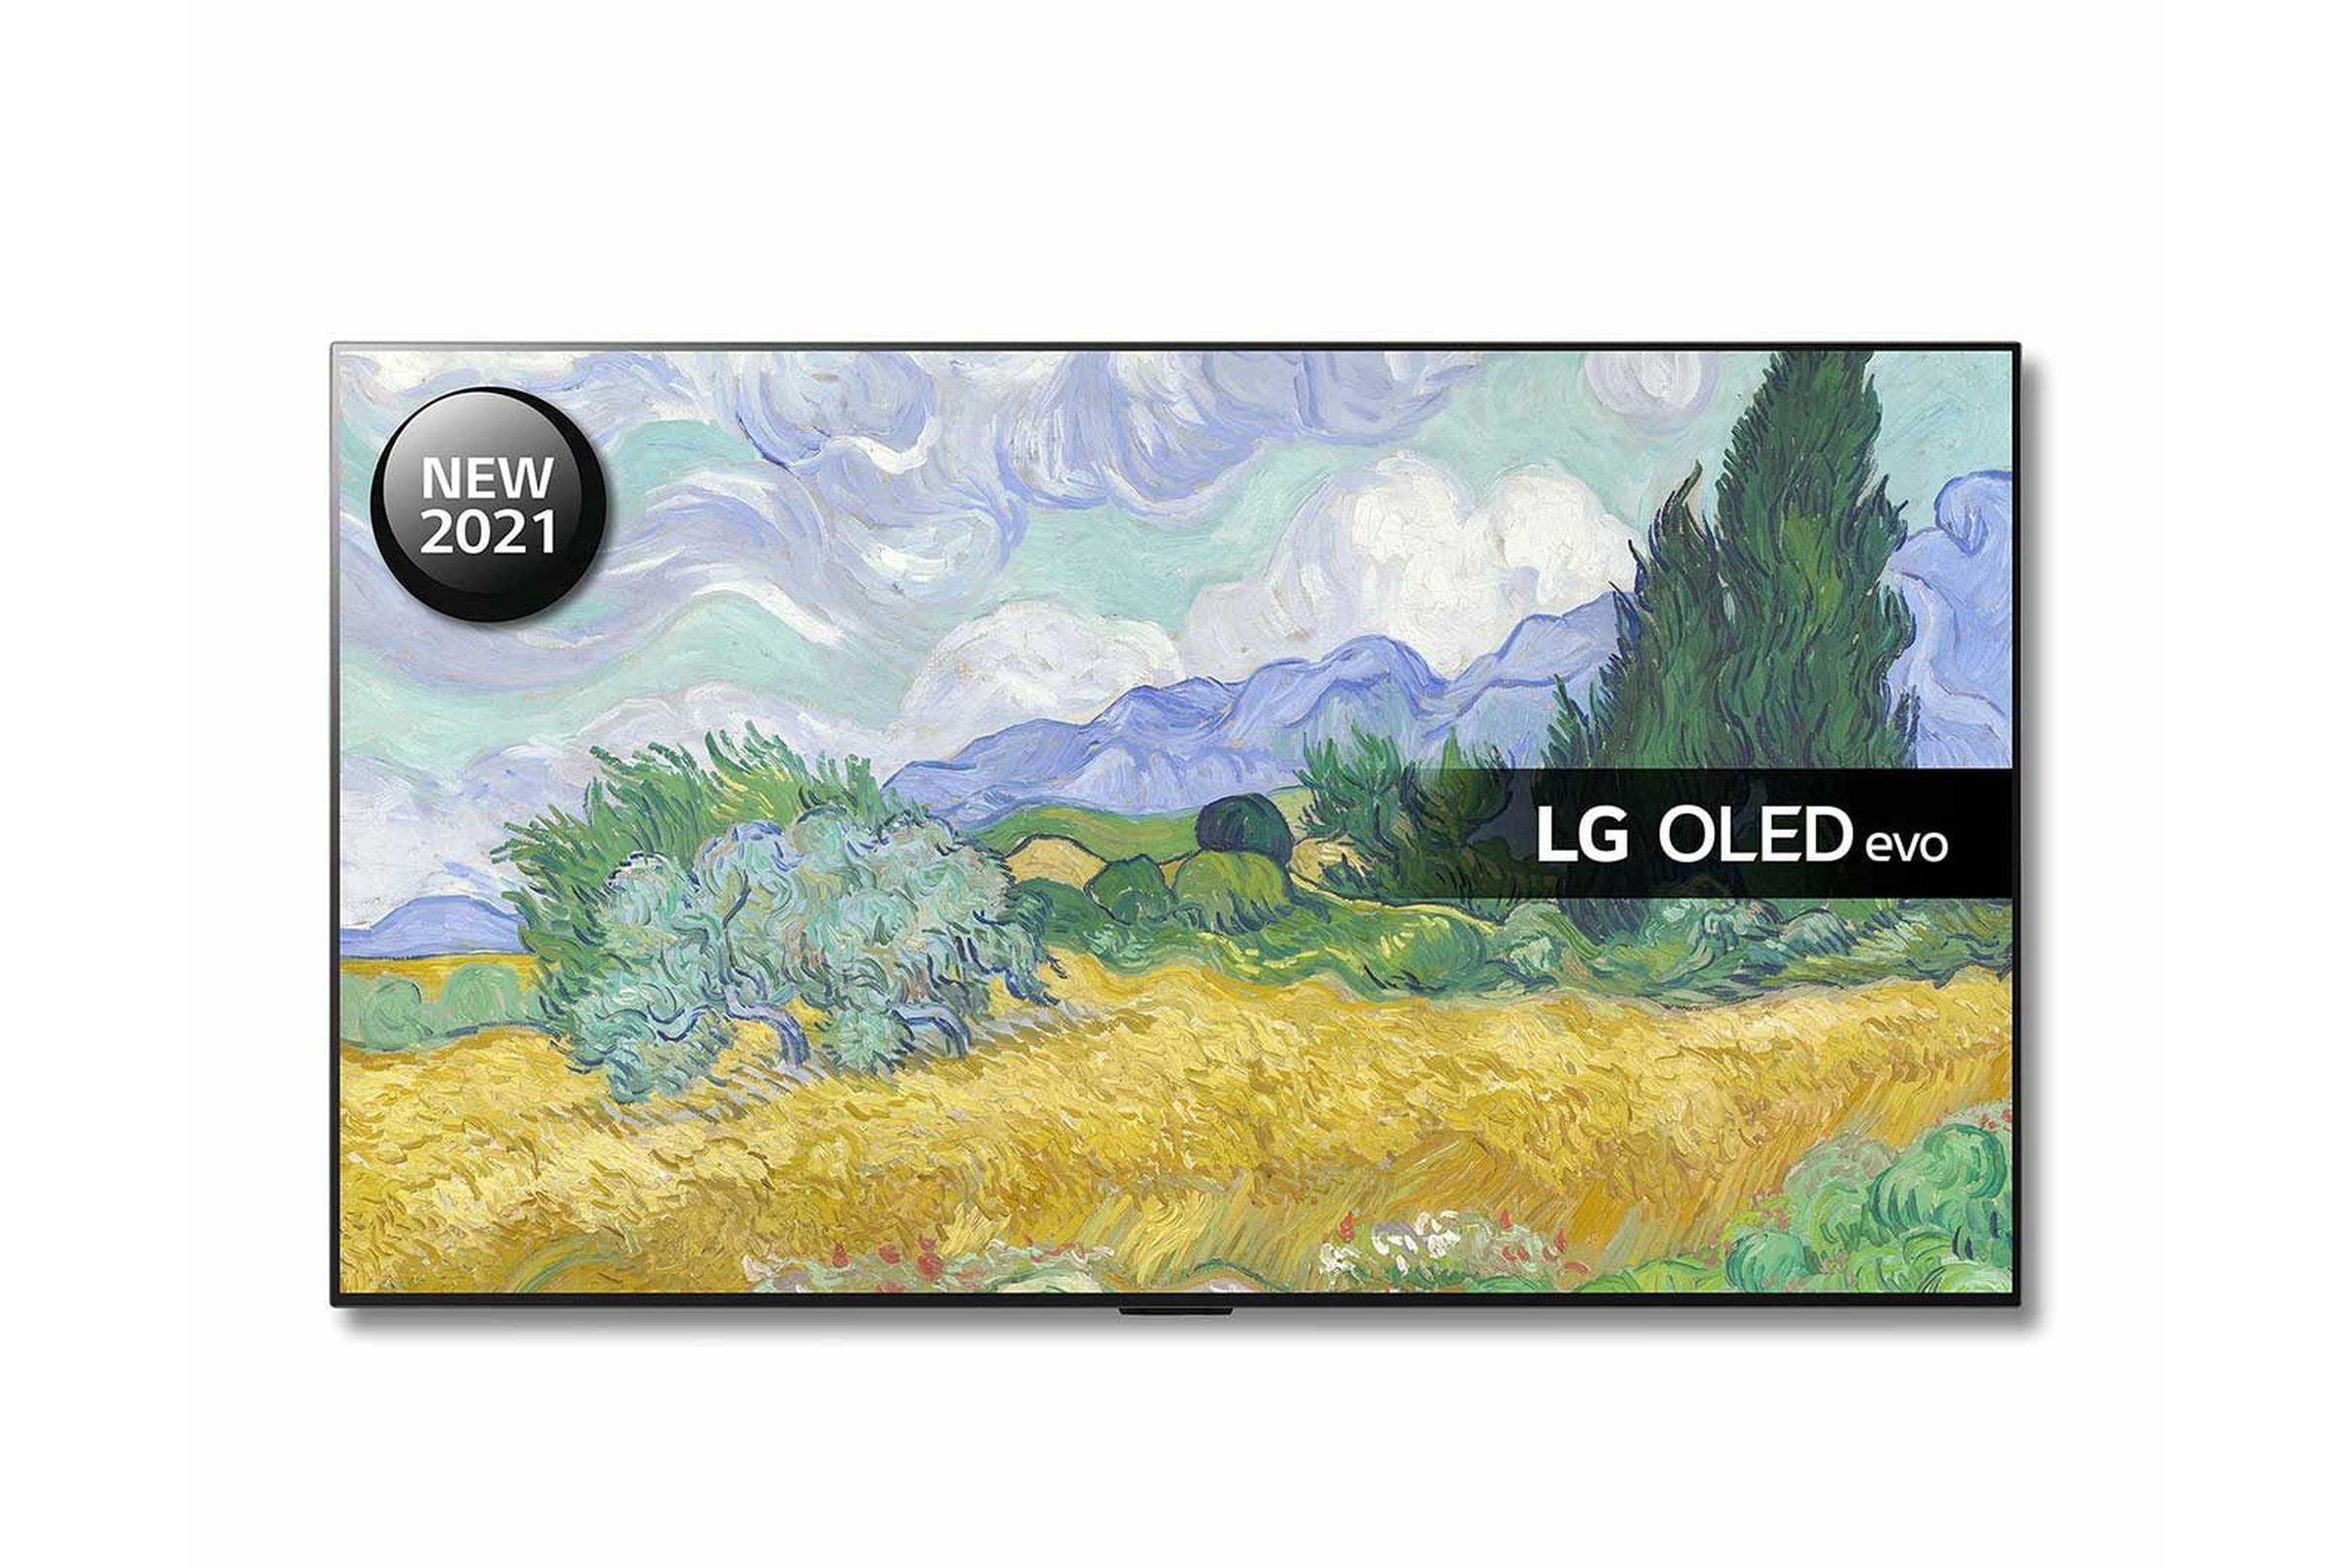 LG is now offering a 5-year warranty for its G1 OLED.